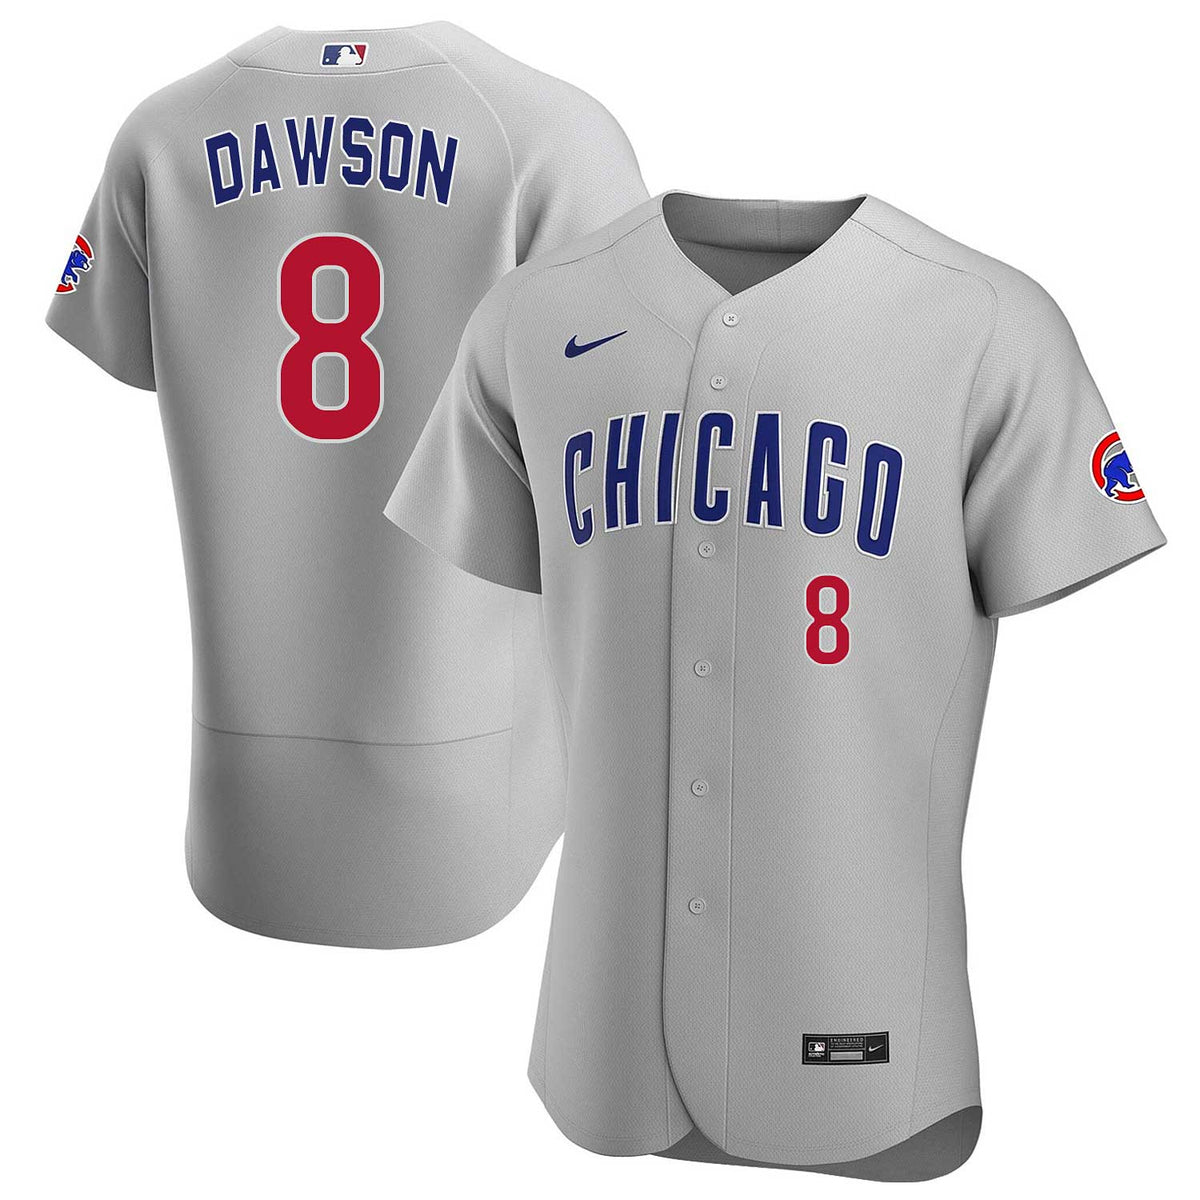 Chicago Cubs Andre Dawson Nike Home Replica Jersey With Authentic